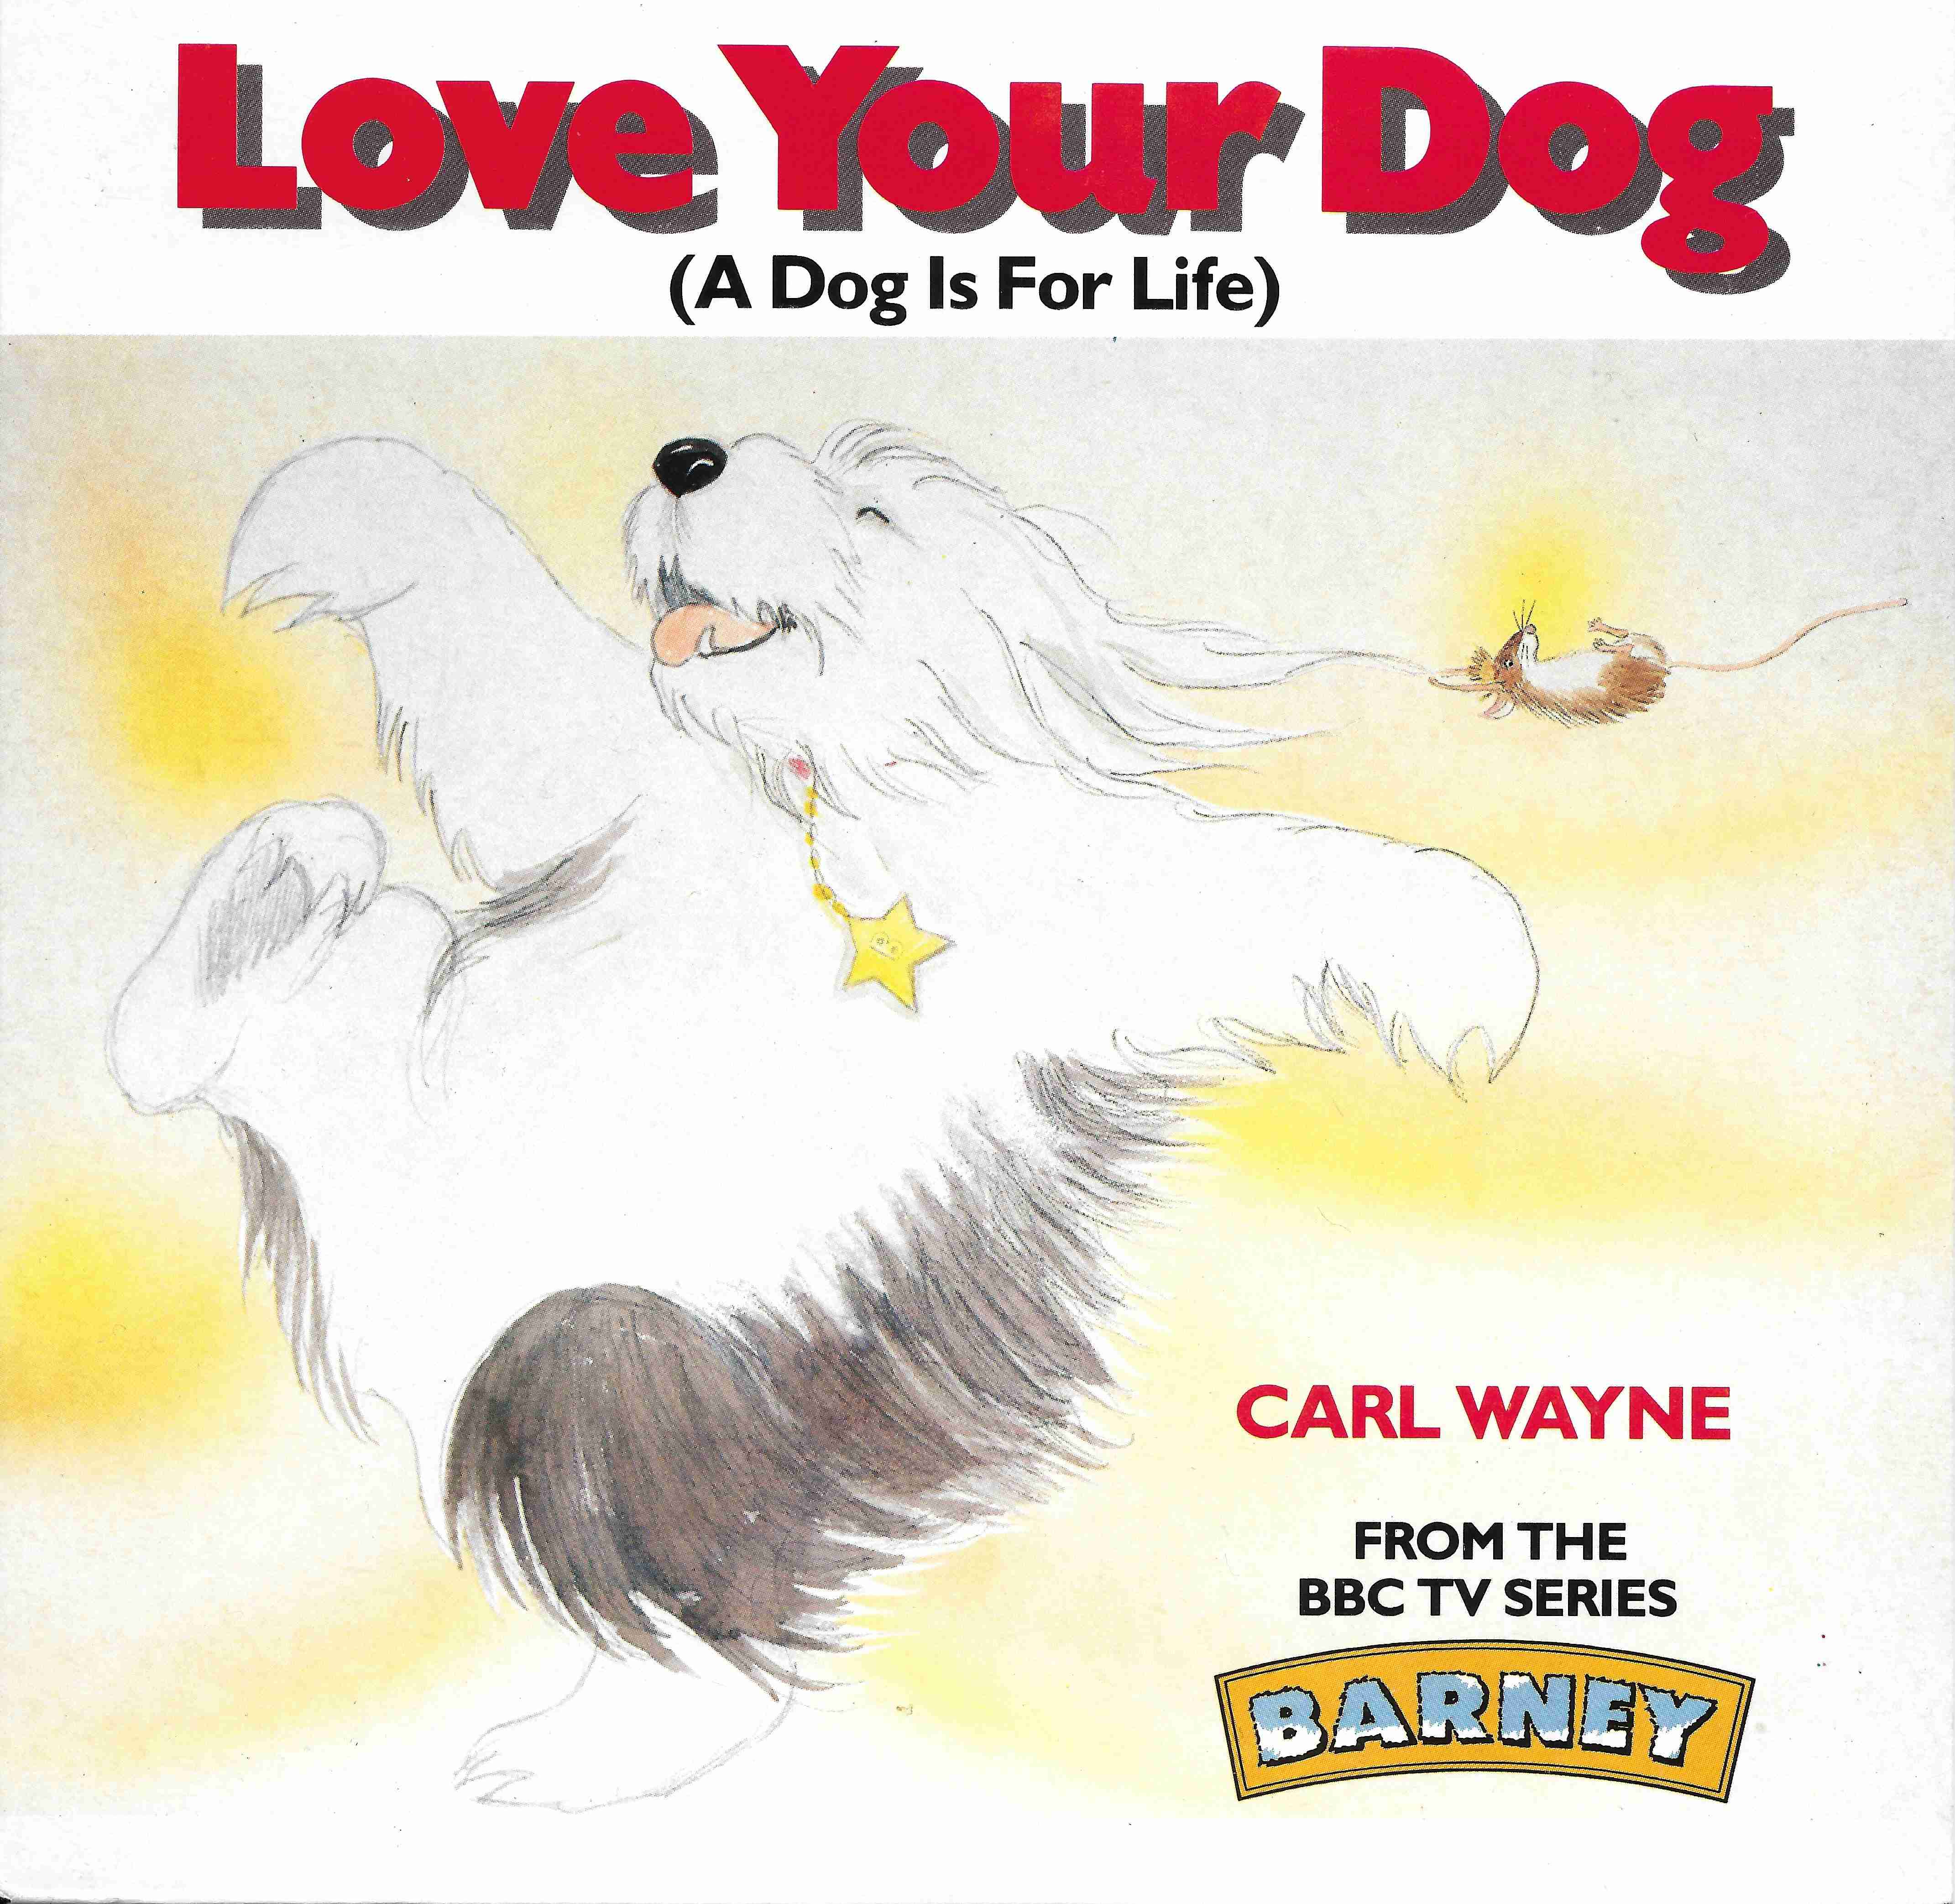 Picture of RESL 233 Love your dog (Barney) by artist Carl Wayne / Mini Pops from the BBC singles - Records and Tapes library